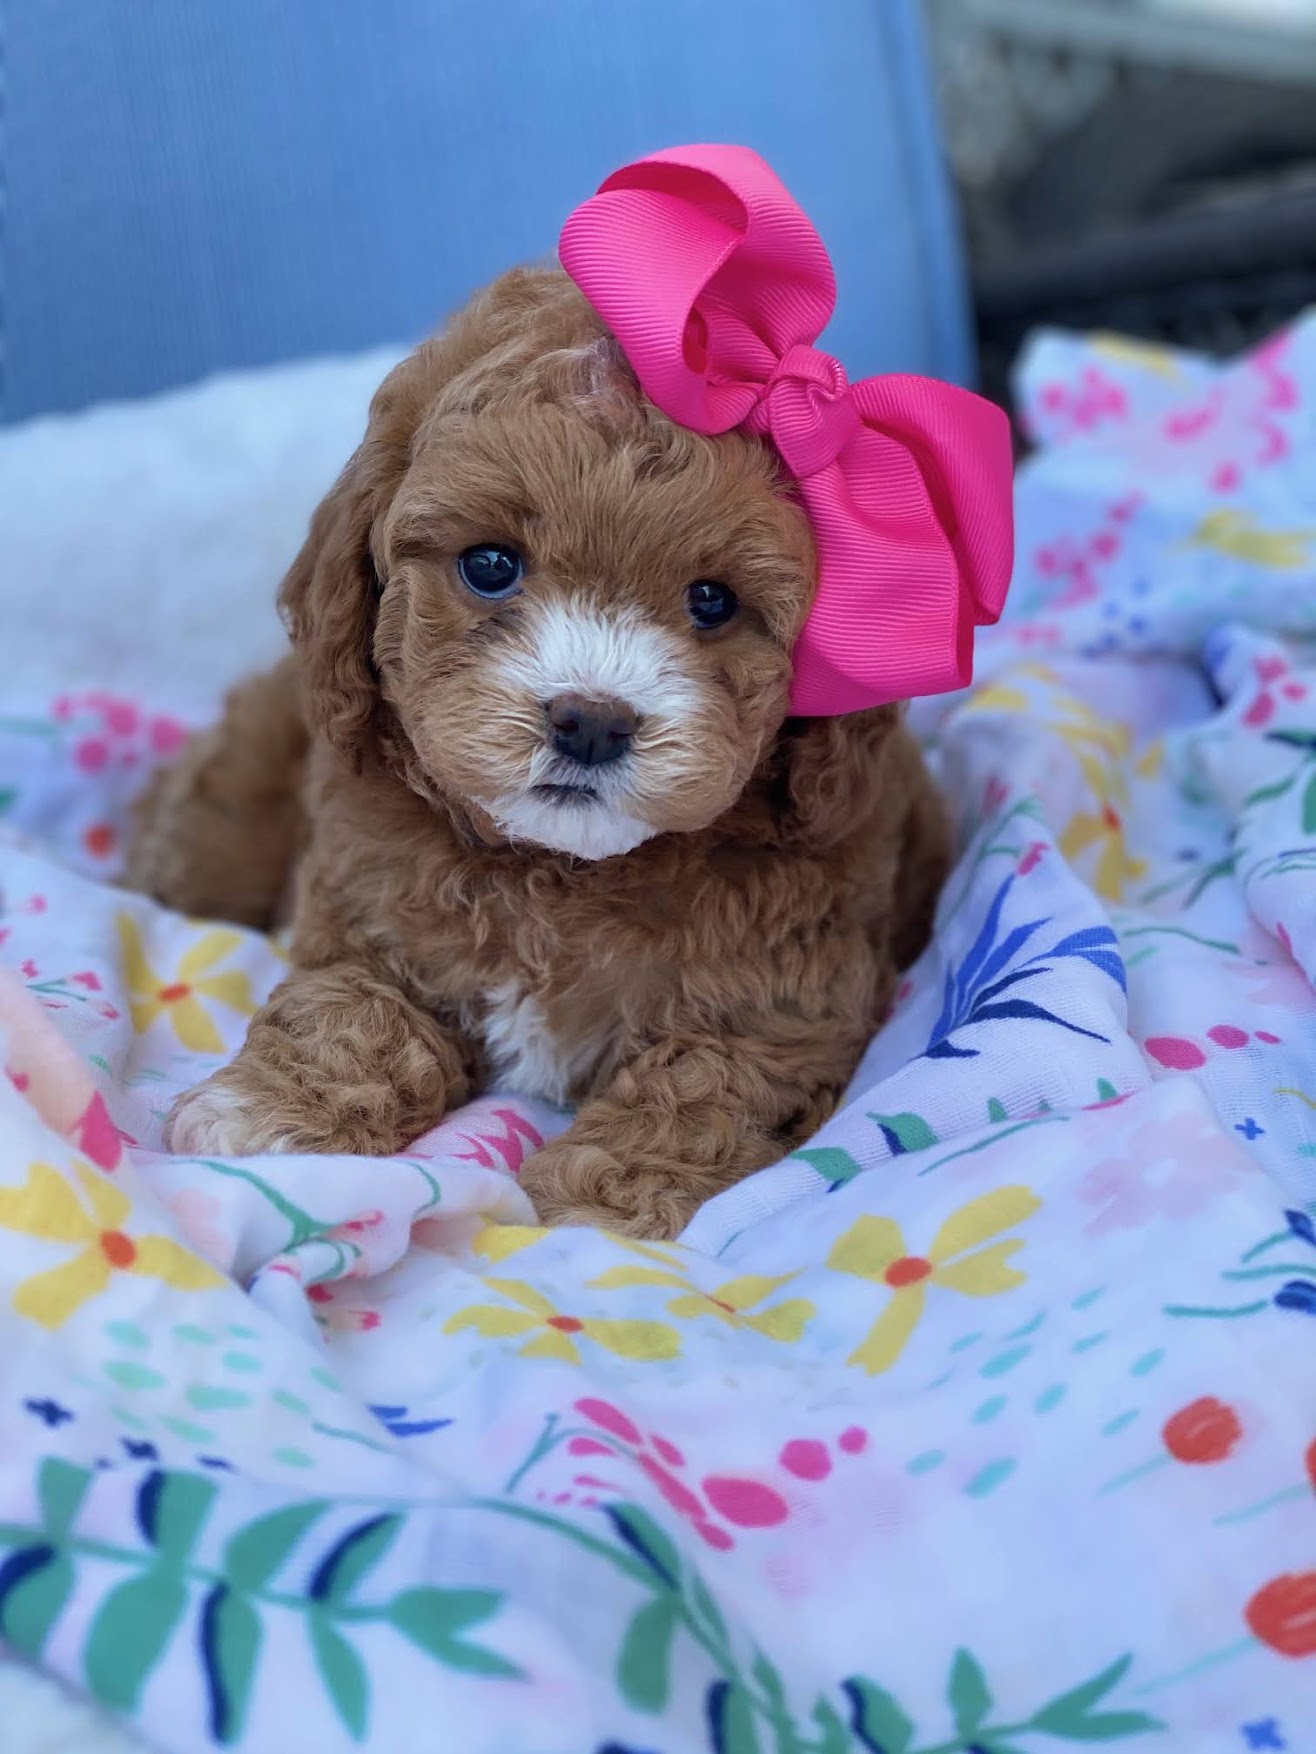 A small brown puppy wearing a delicate pink bow on its head, looking adorable and charming.